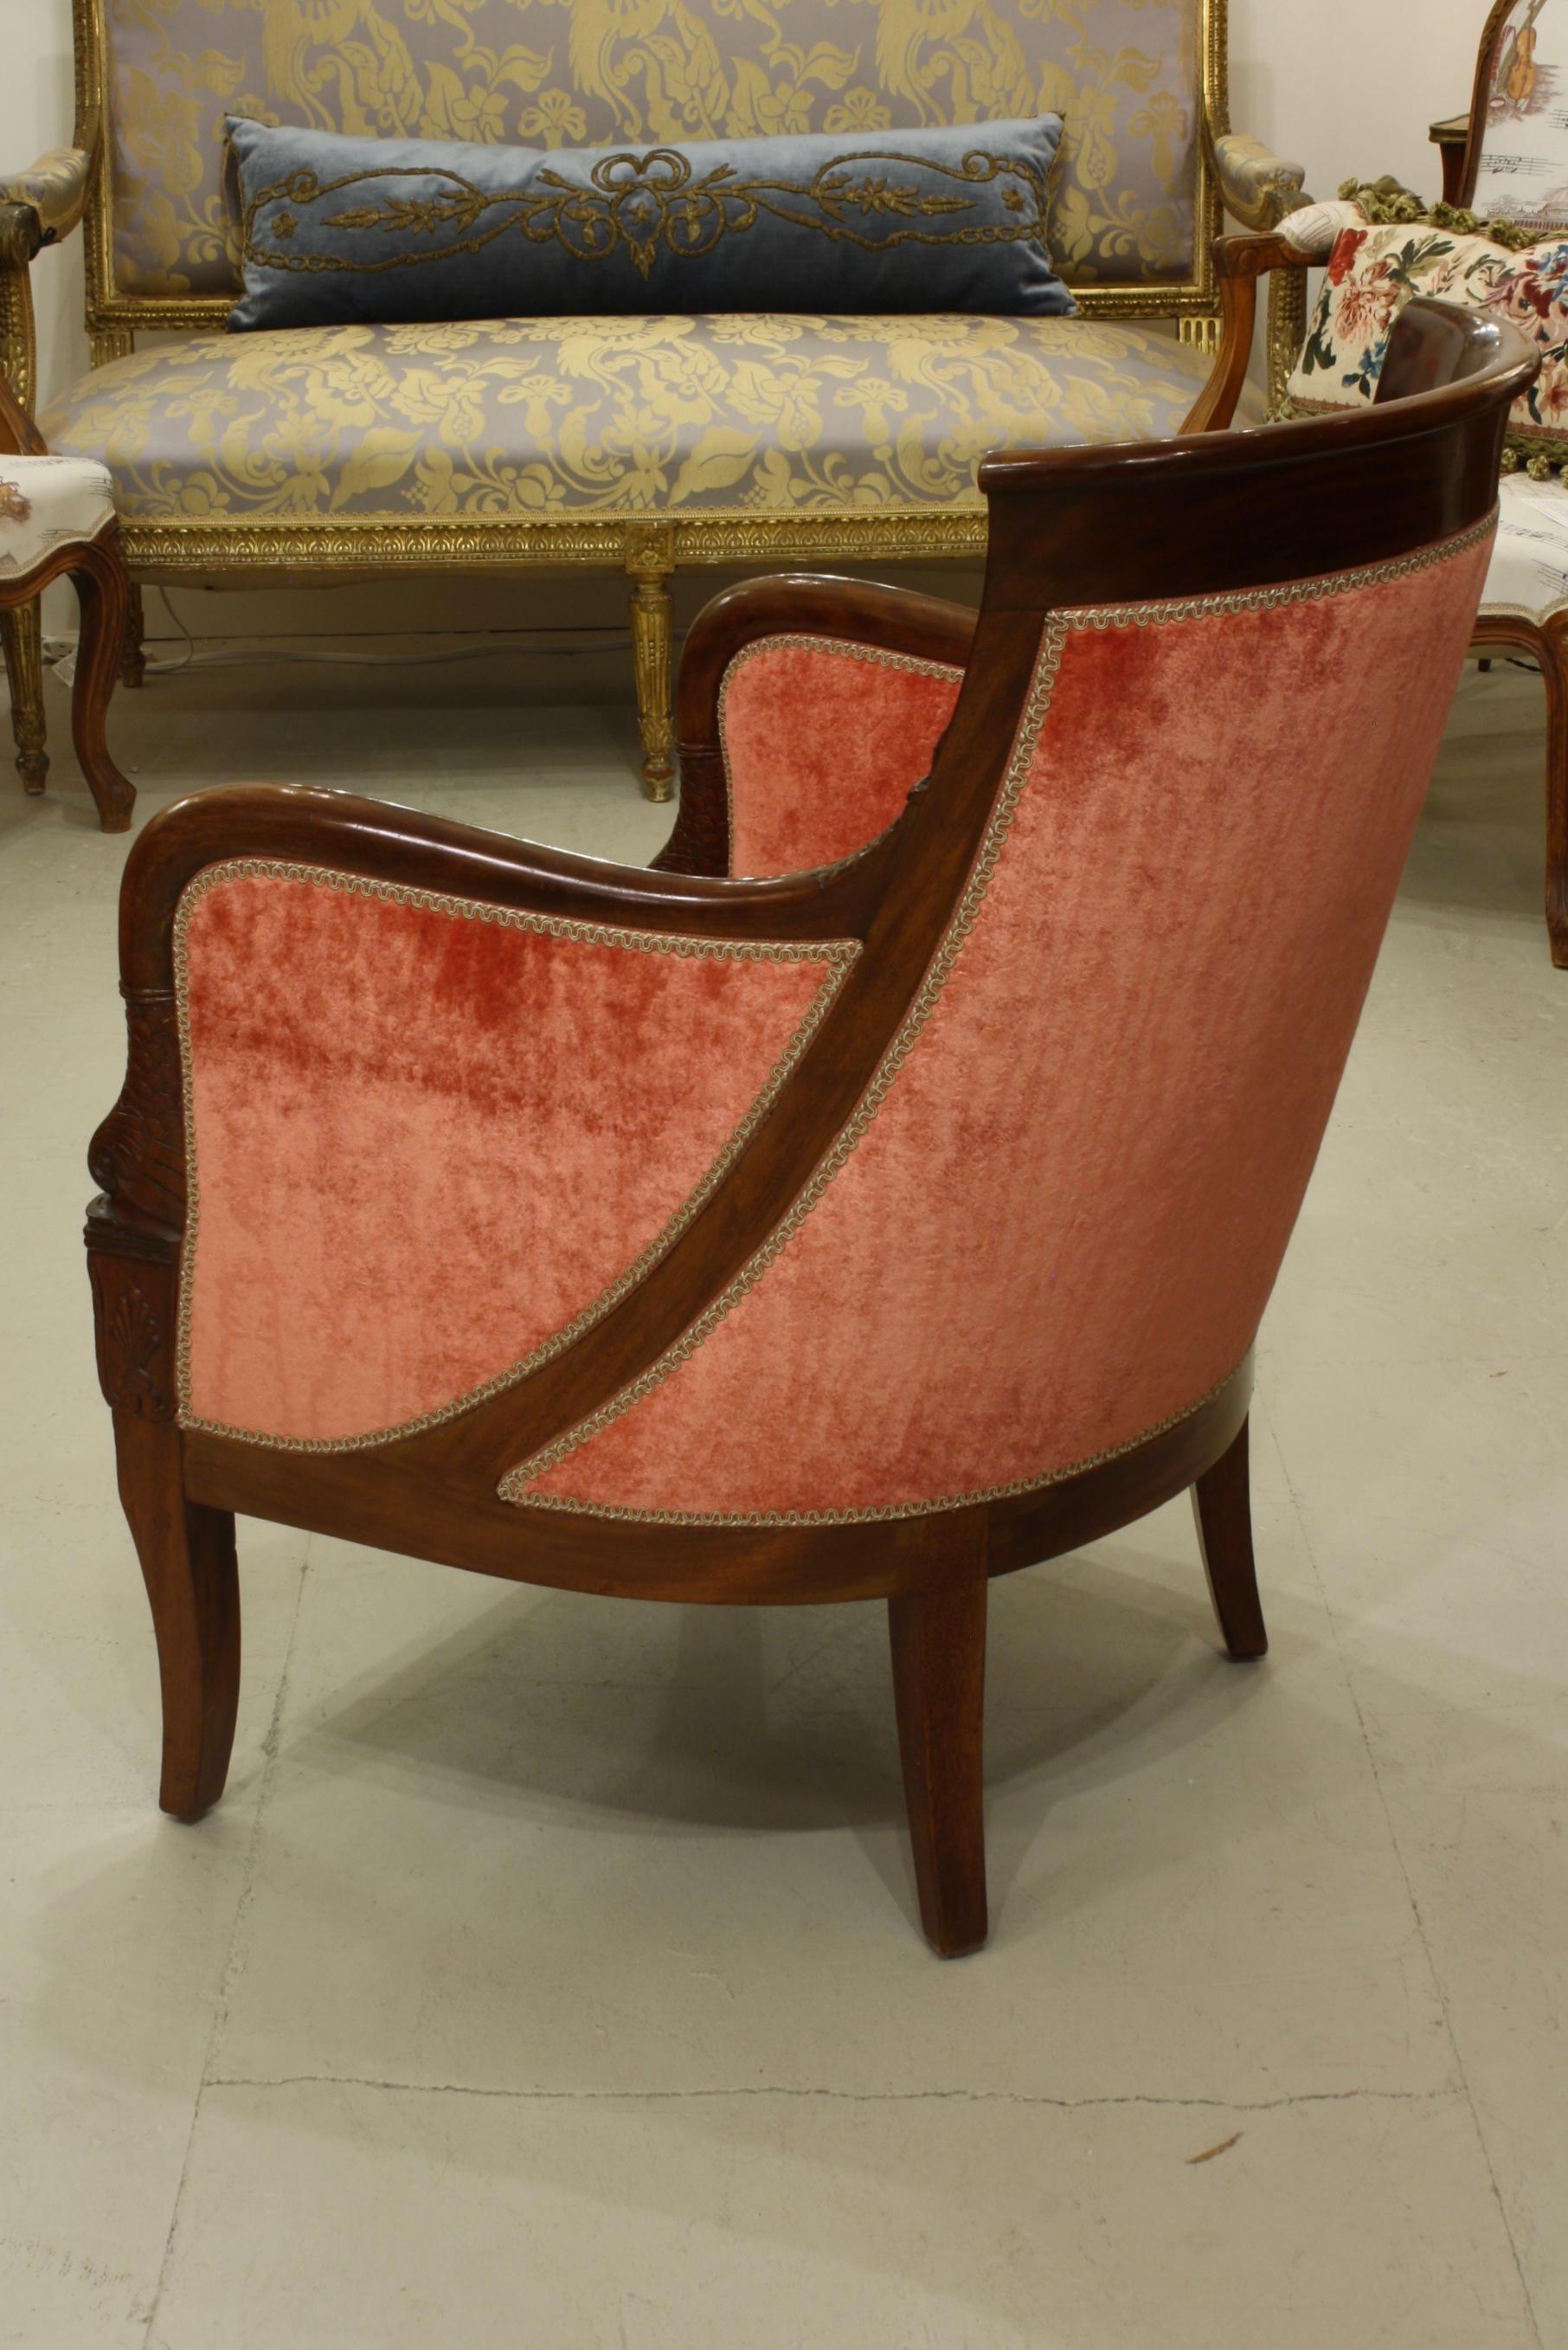 Pair of French Empire Style Mahogany Bergere Armchairs with Dolphins (20. Jahrhundert)